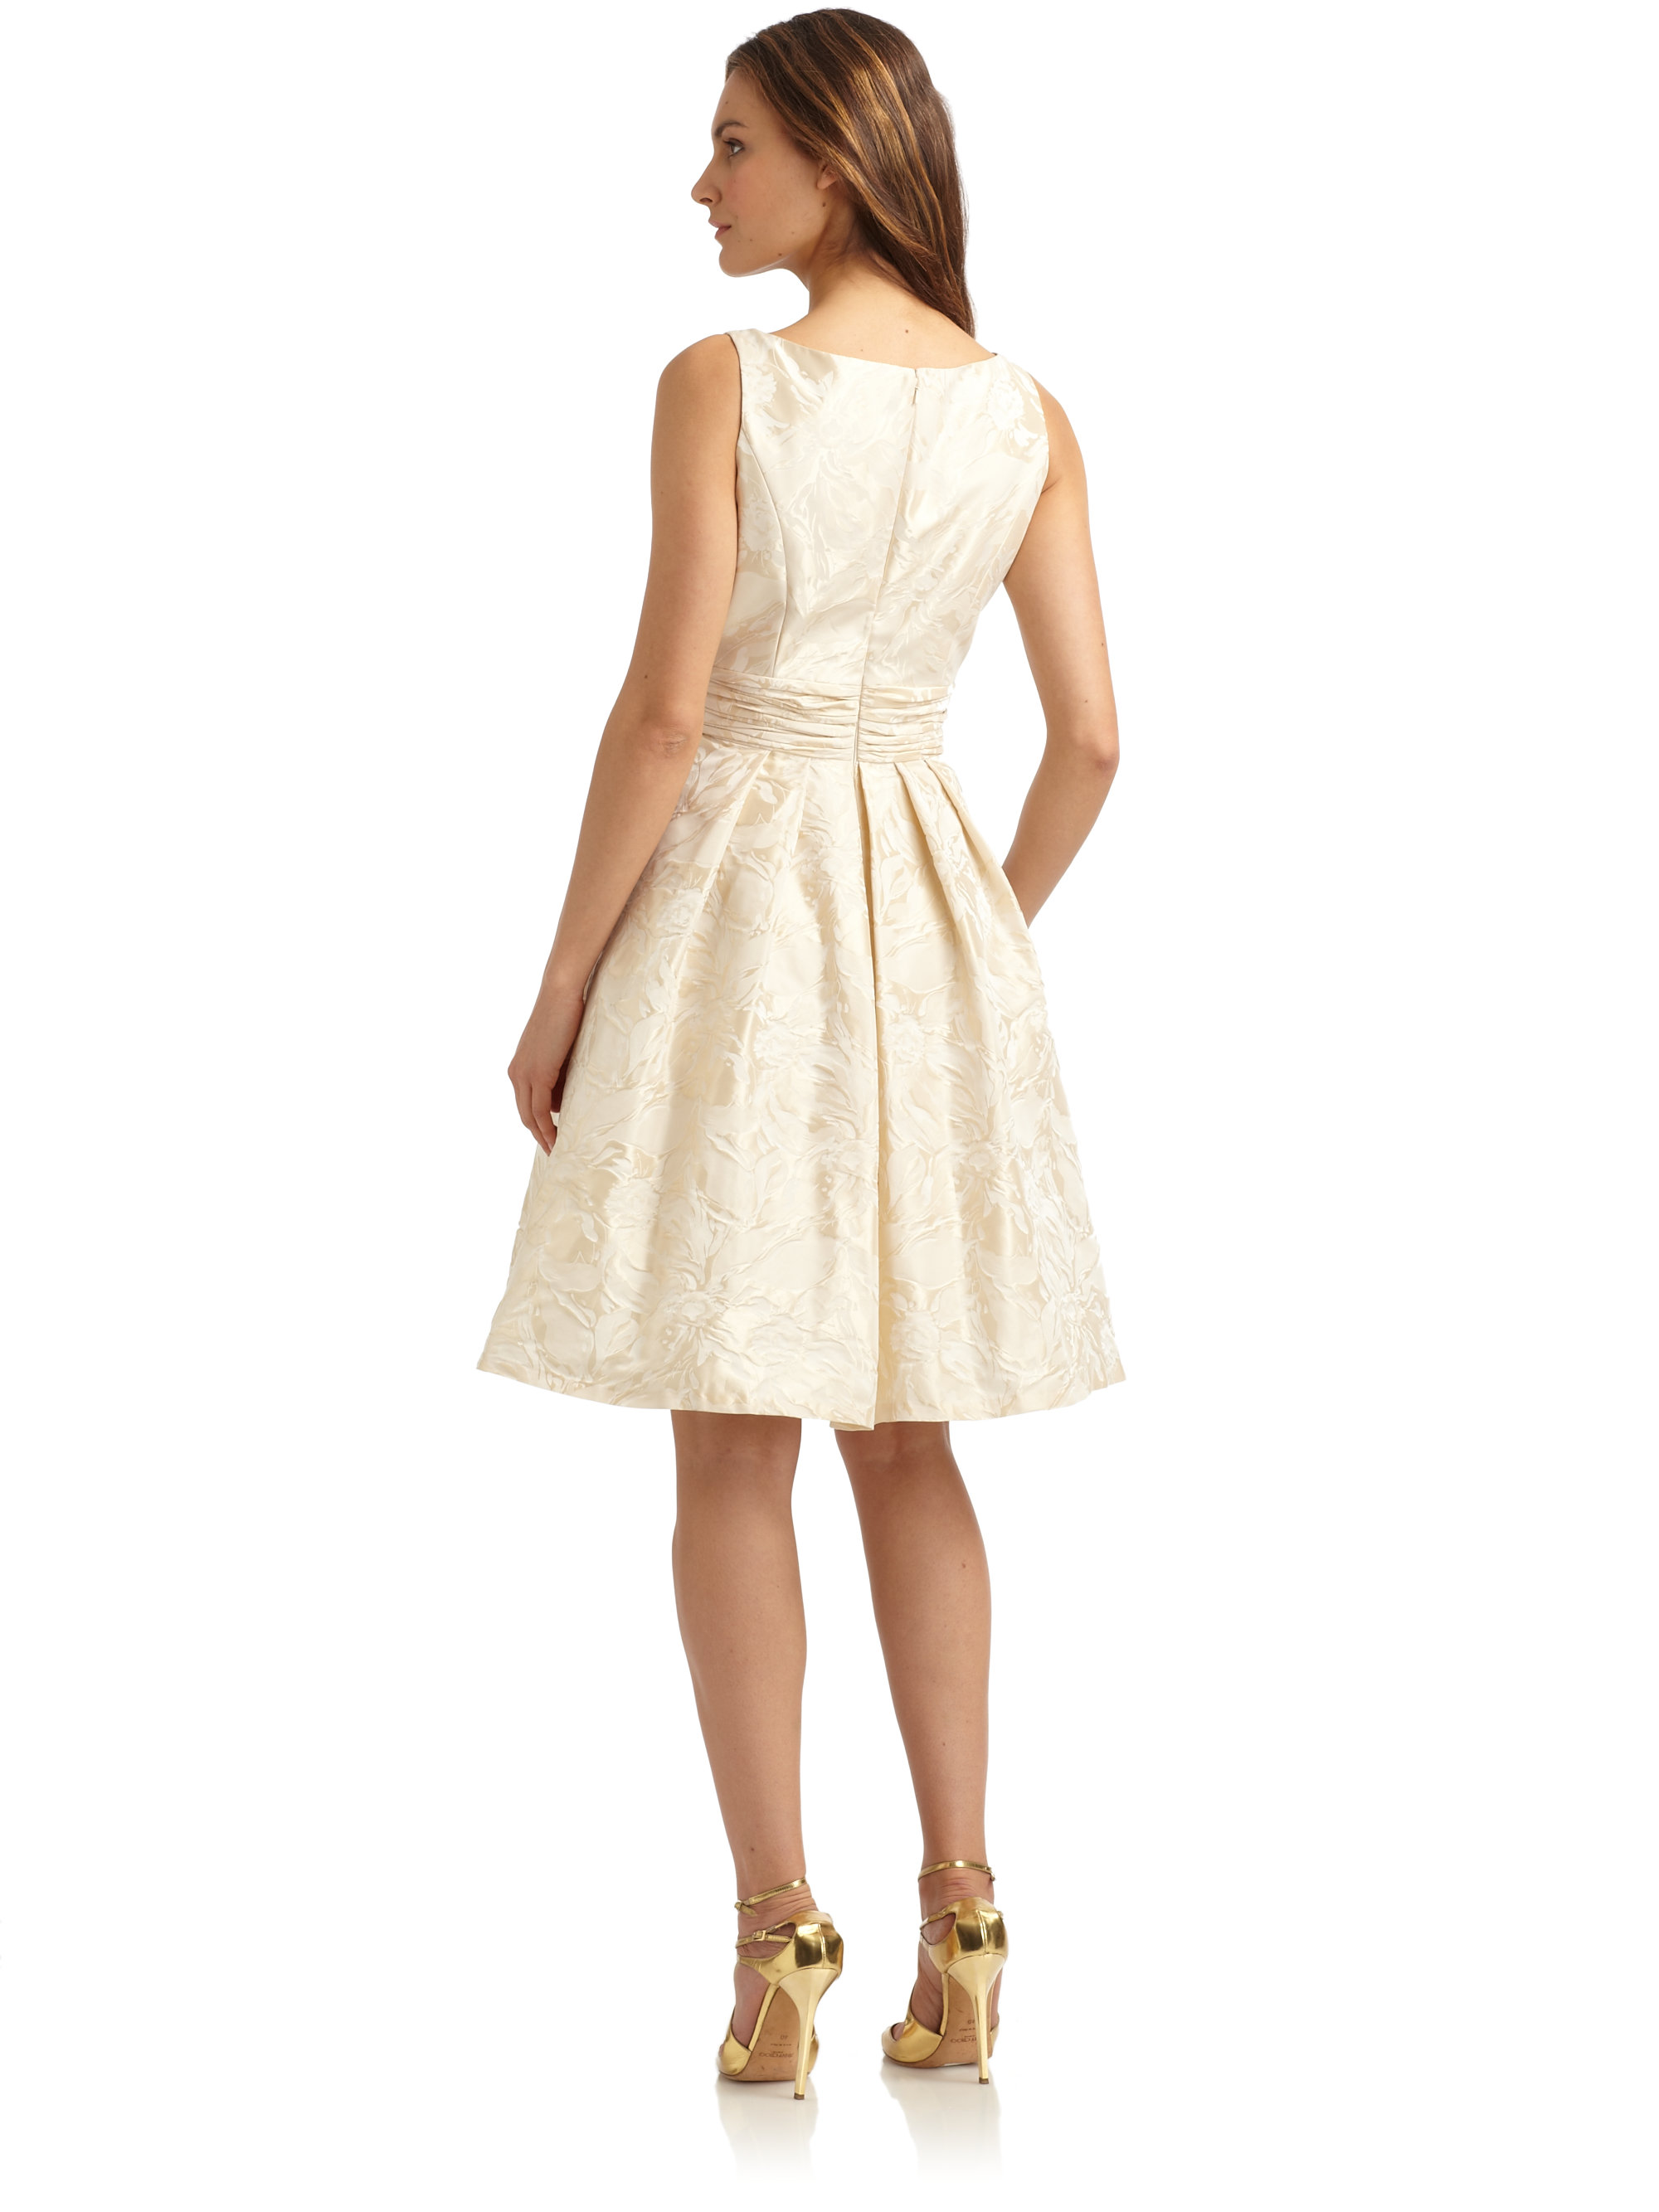 Lyst - Theia Pleated Floral Brocade Cocktail Dress in White